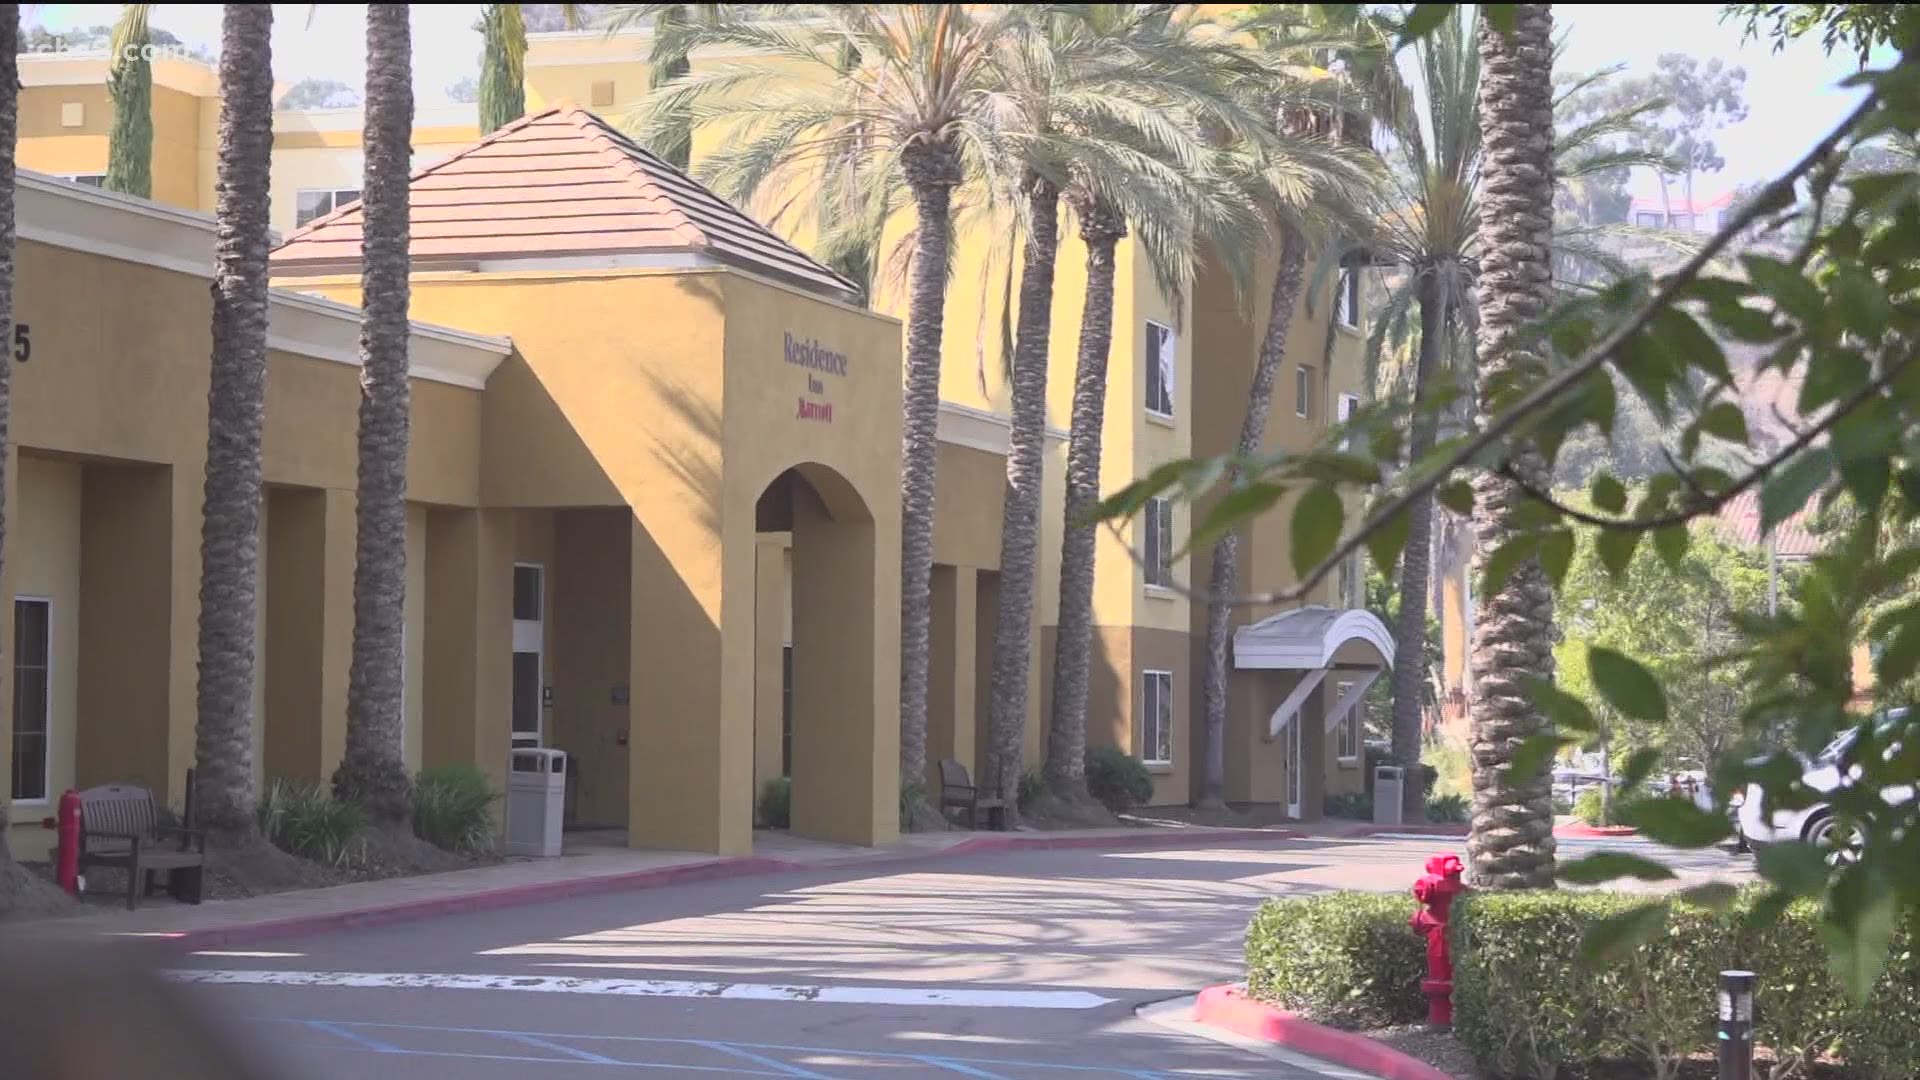 The two hotels would address the homelessness crisis in the San Diego area.